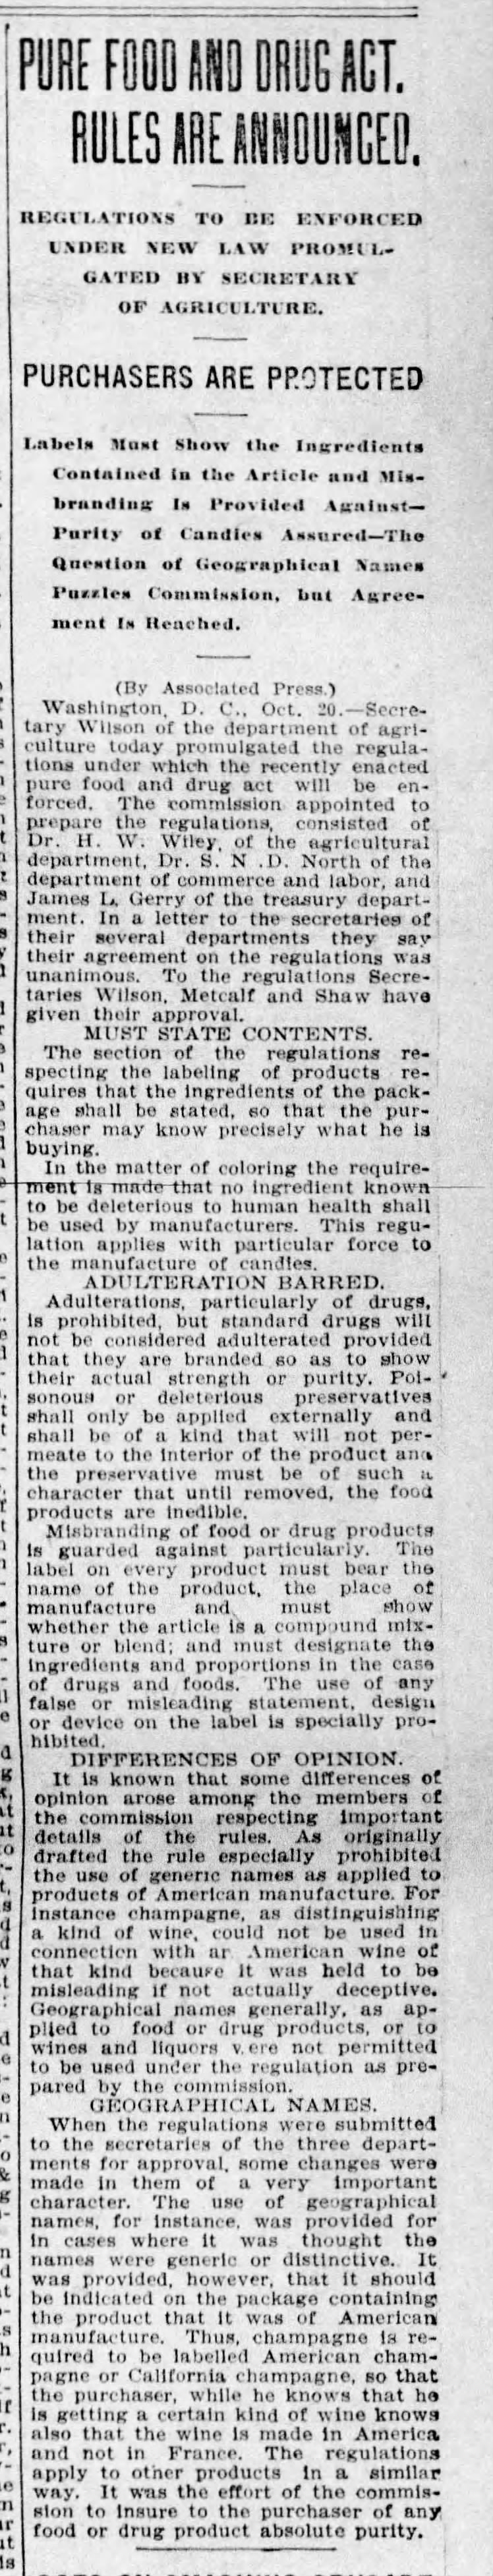 Pure Food and Drug Act rules are announced, 1906